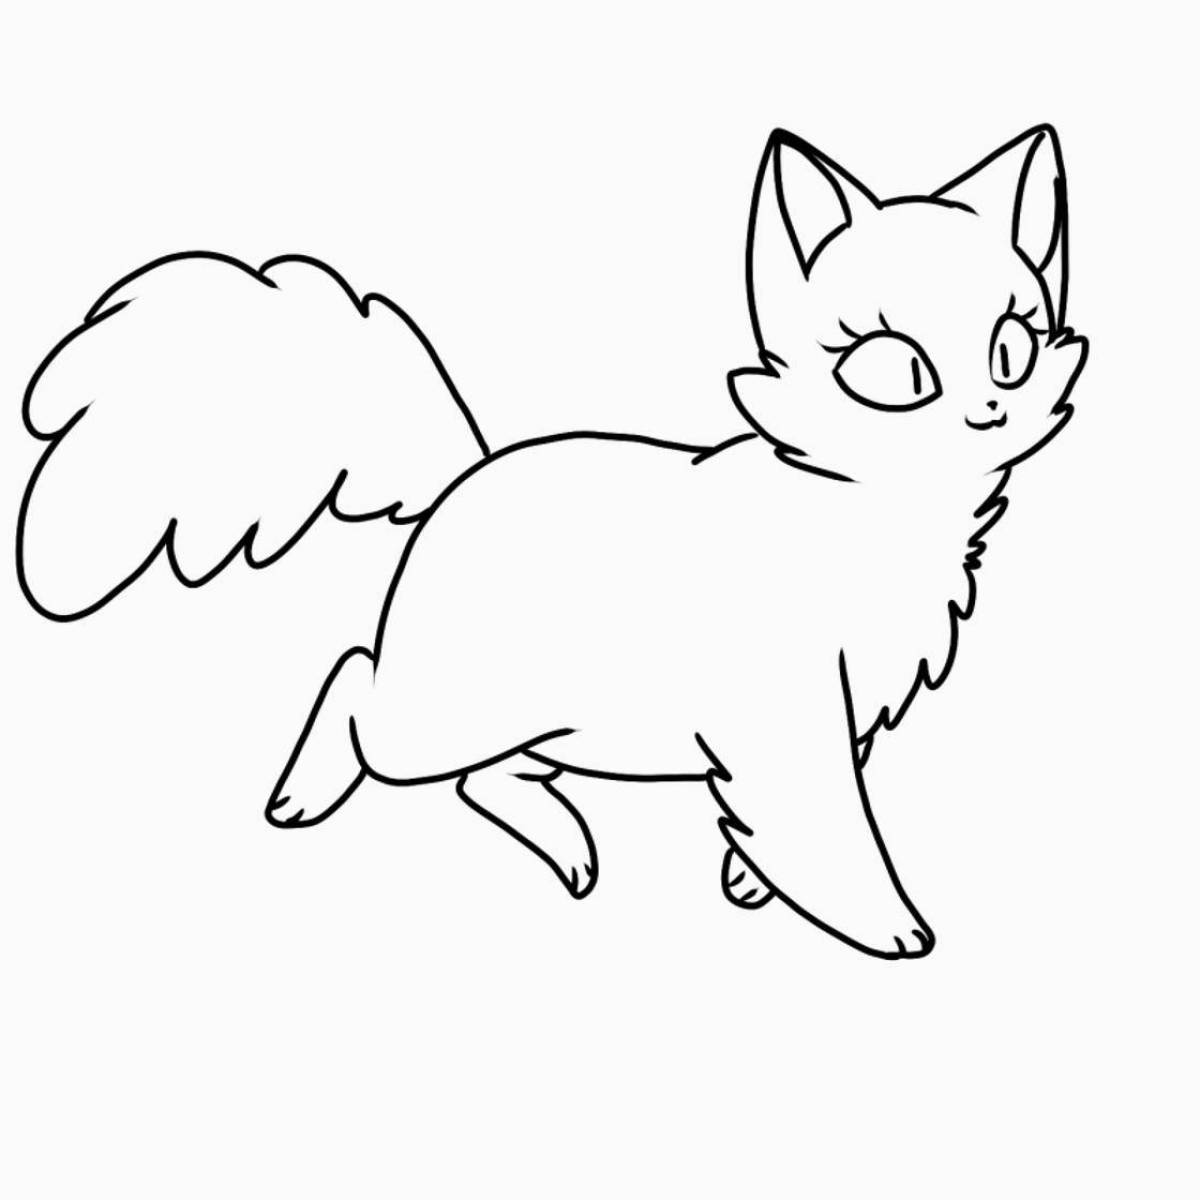 Adorable flying cat coloring book